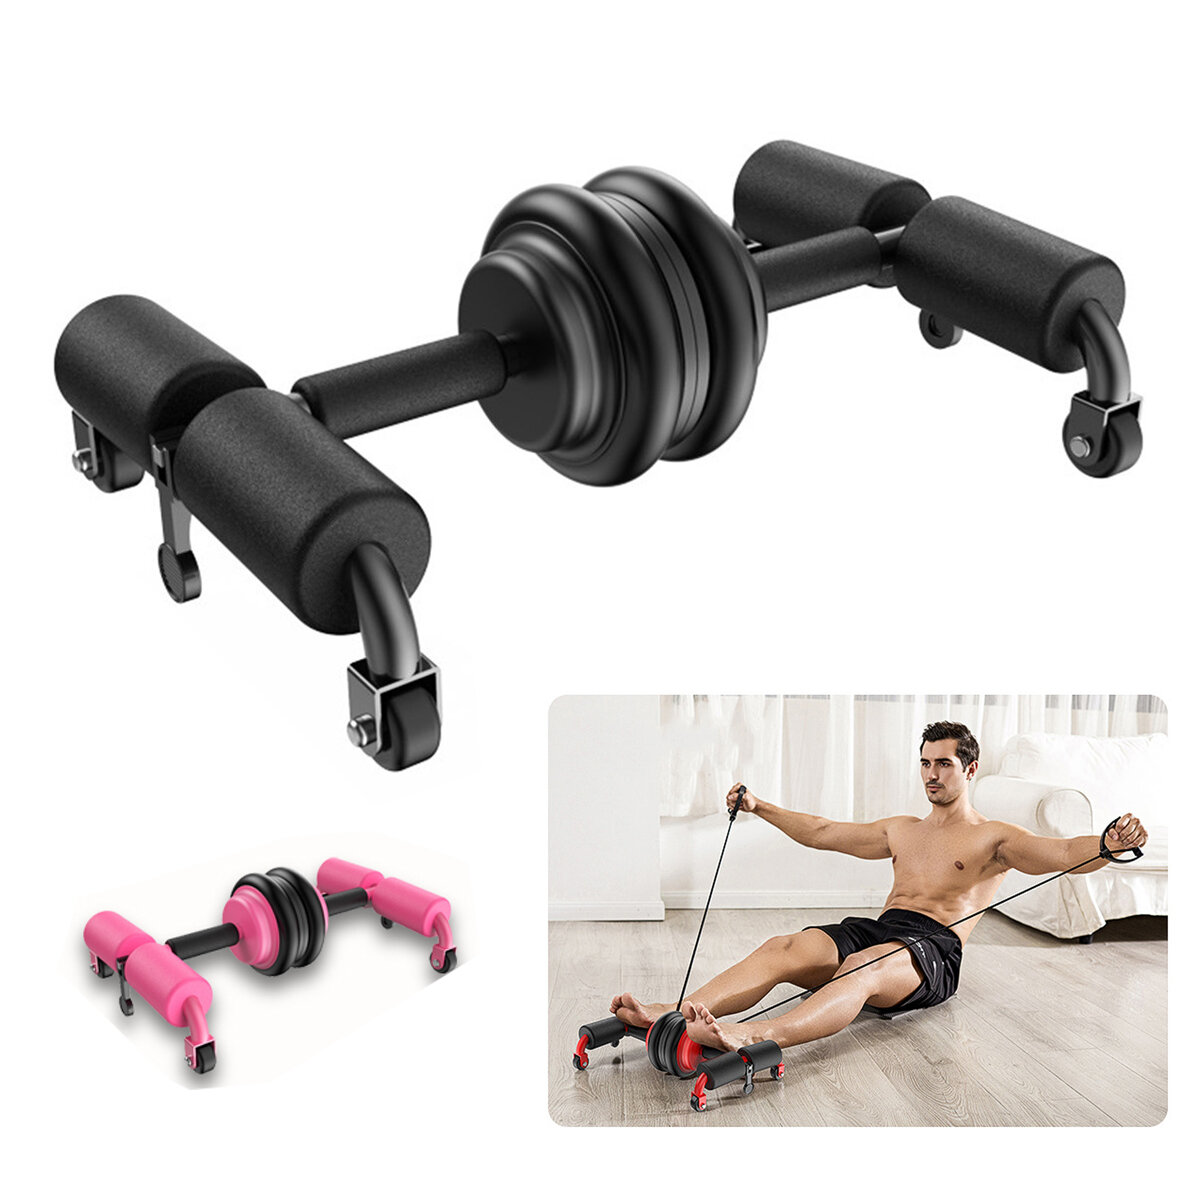 Image of Multi-function Fitness Sit Up Bar Assistant Gym Push Up Device Exercise Tools for Home Abdominal Muscle Training